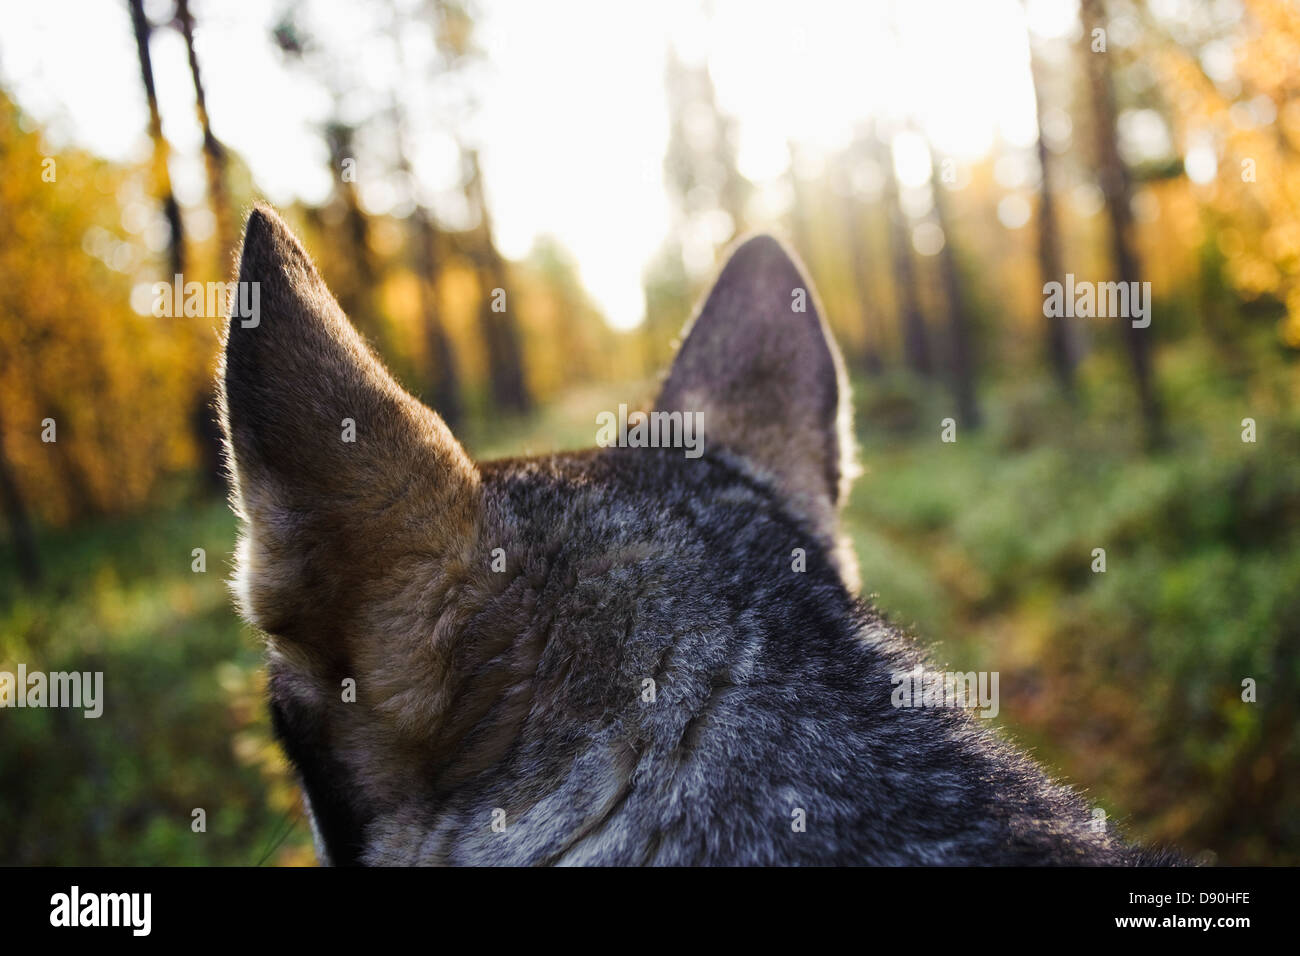 Rear view of dog, close-up Stock Photo